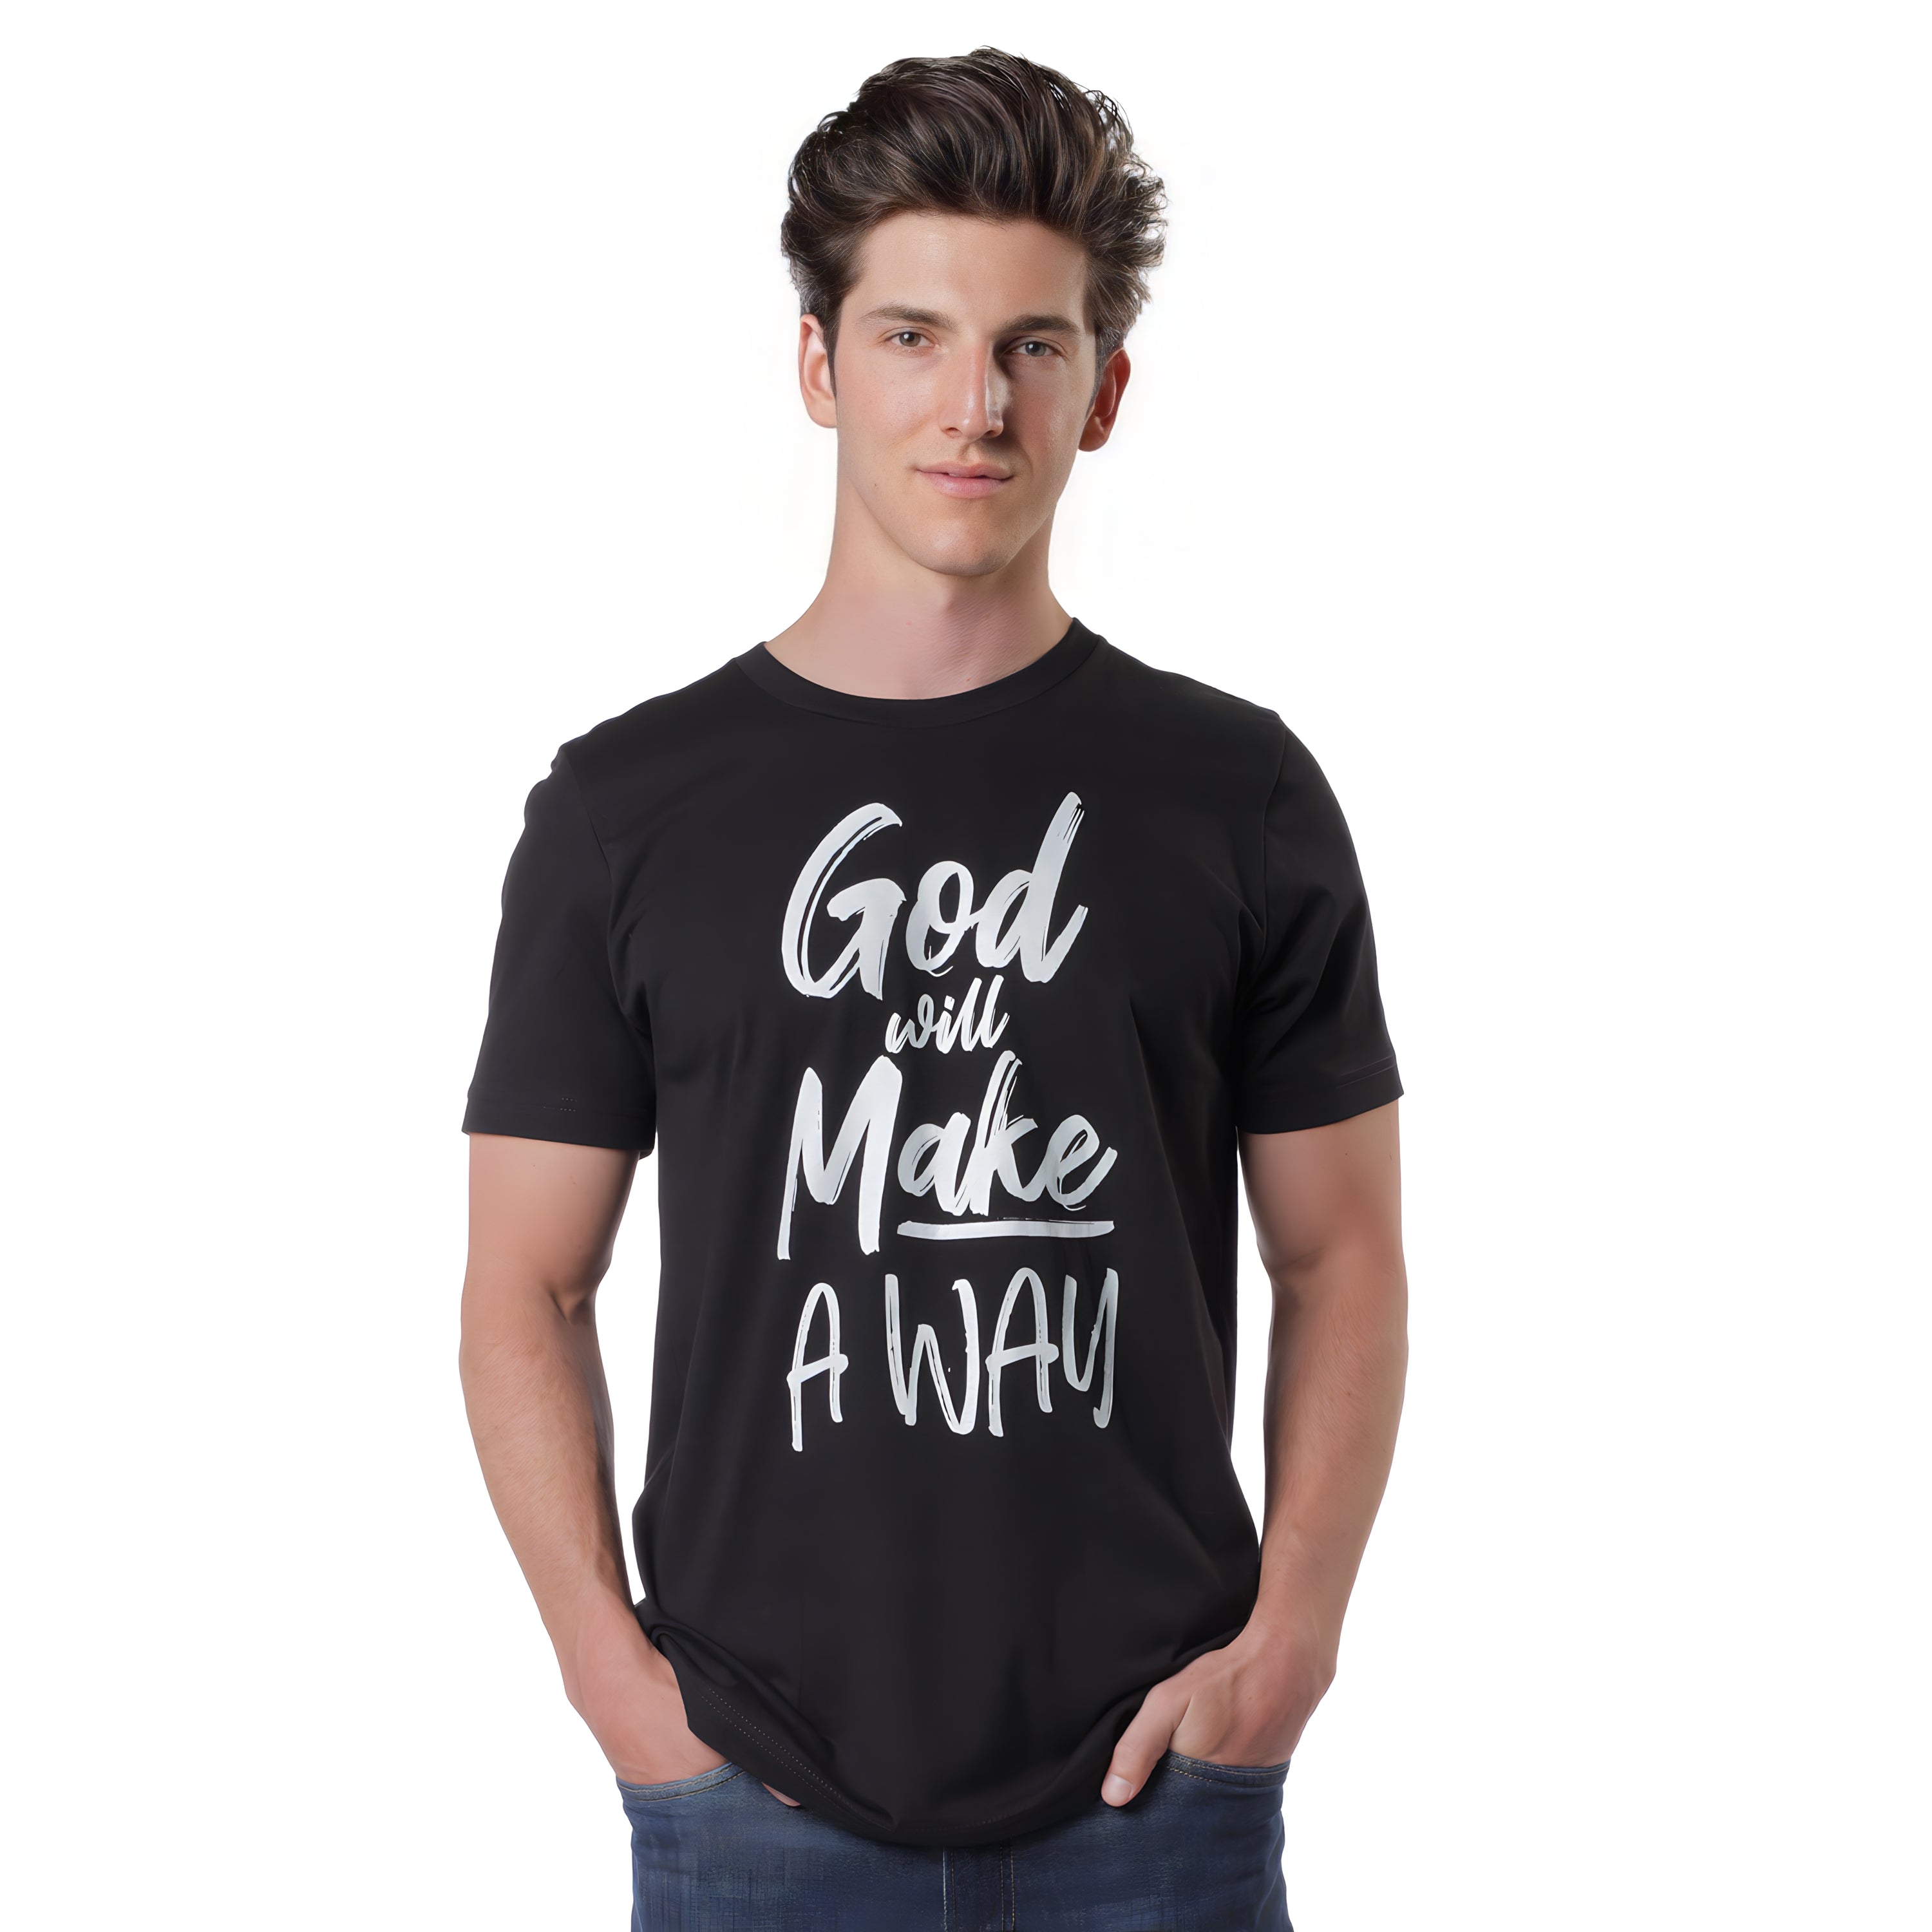 God Will Make A Way, Used By God, Used By God Clothing, Christian Apparel, Christian T-Shirts, Christian Shirts, christian t shirts for women, Men's Christian T-Shirt, Christian Clothing, God Shirts, christian clothing t shirts, Christian Sweatshirts, womens christian t shirts, t-shirts about jesus, God Clothing, Jesus Hoodie, Jesus Clothes, God Is Dope, Art Of Homage, Red Letter Clothing, Elevated Faith, Beacon Threads, God The Father Apparel